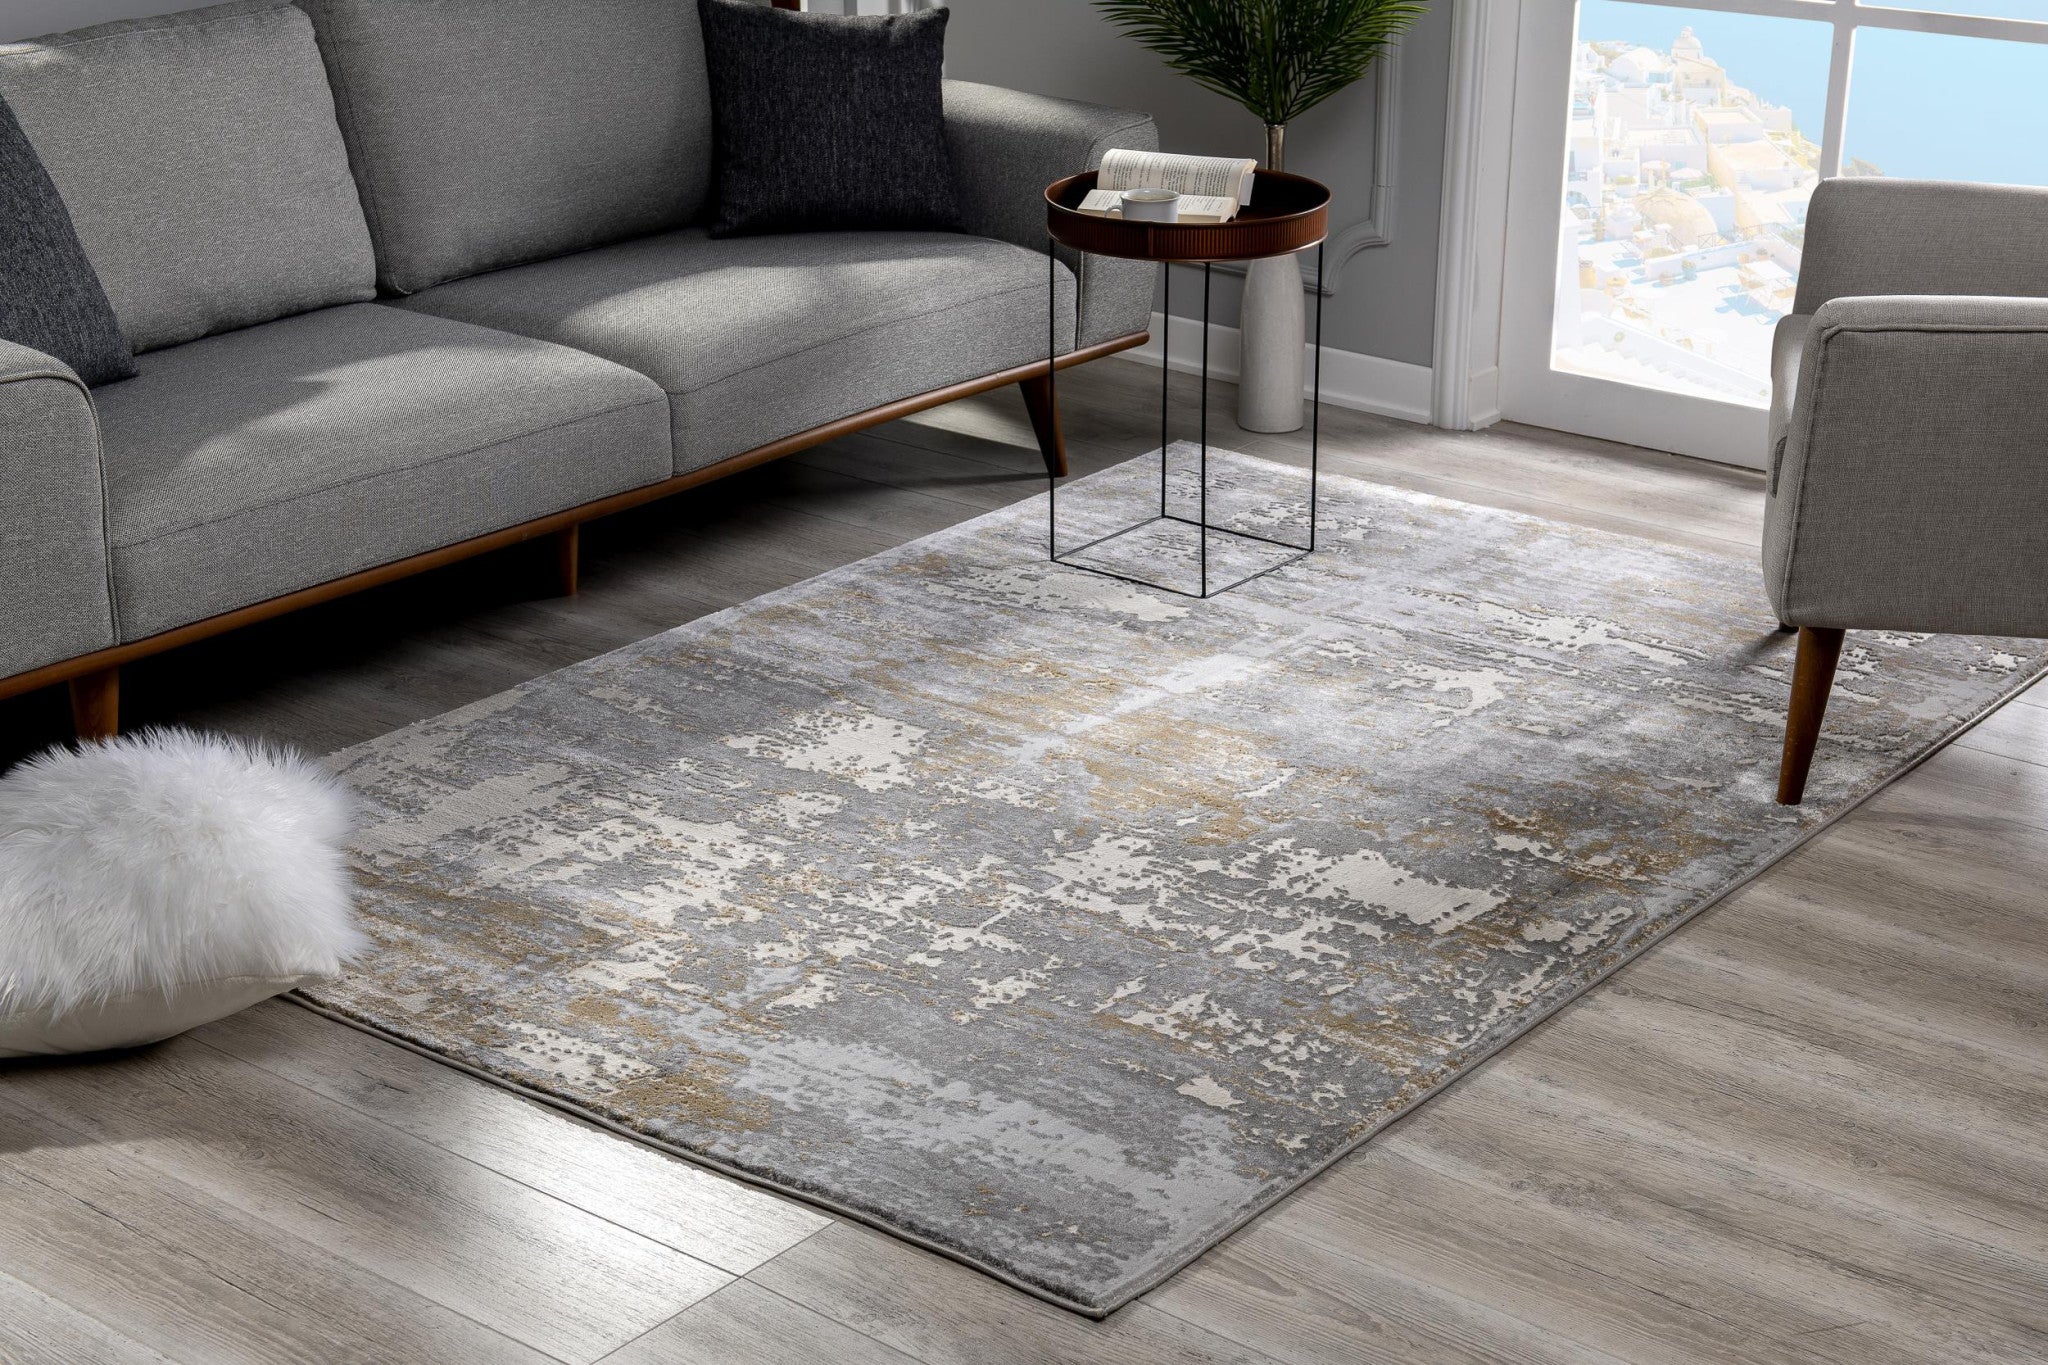 4’ X 6’ Beige And Gray Distressed Area Rug